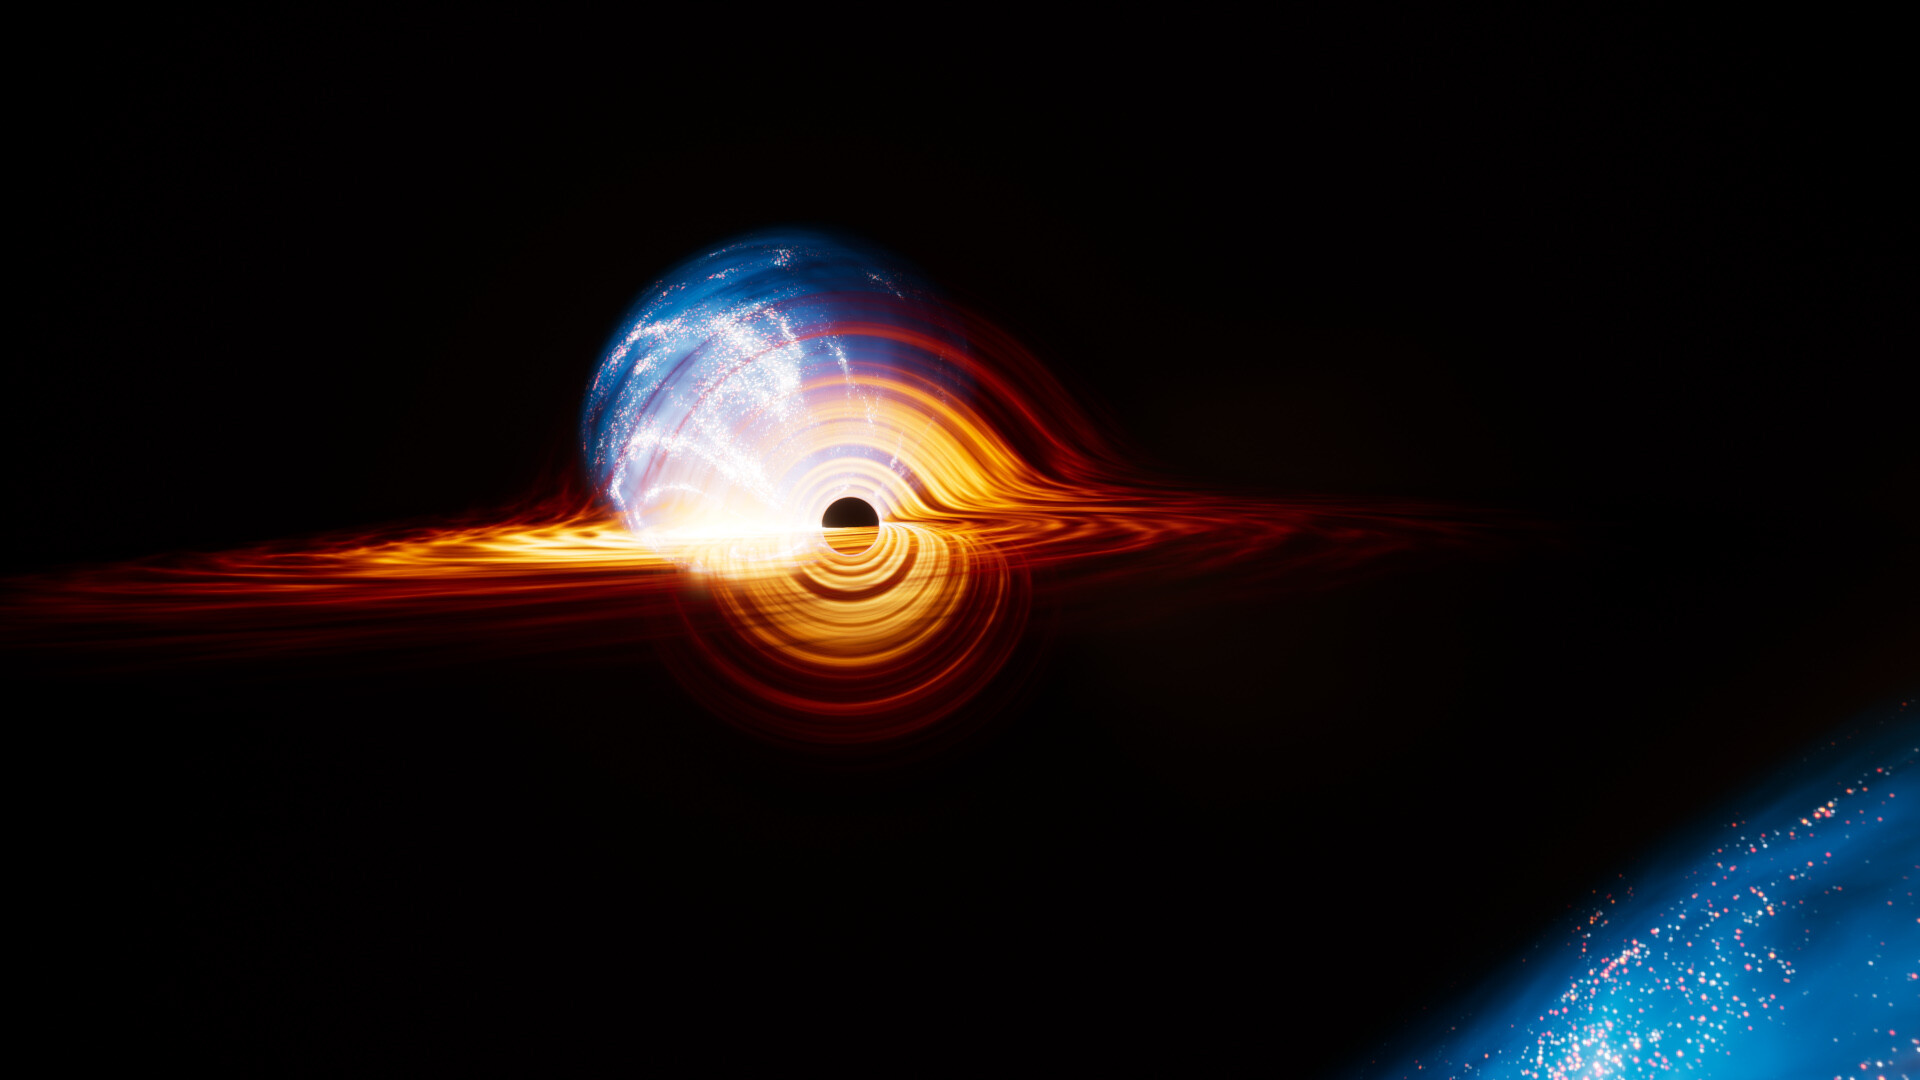 Black Hole: A region of spacetime from which nothing can escape, Darkness. 1920x1080 Full HD Wallpaper.